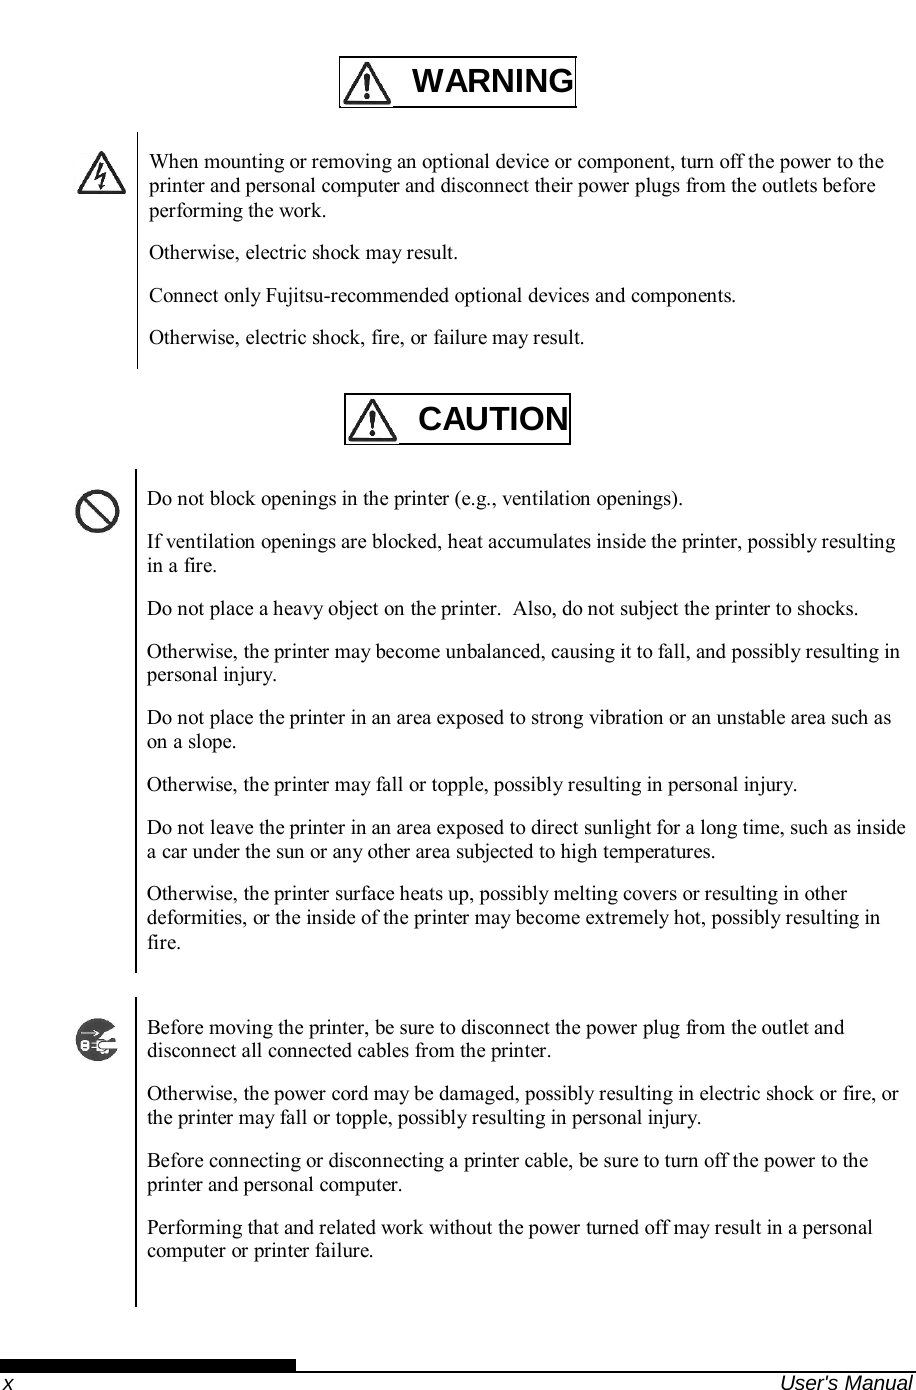    x  User&apos;s Manual   WARNING    When mounting or removing an optional device or component, turn off the power to the printer and personal computer and disconnect their power plugs from the outlets before performing the work. Otherwise, electric shock may result. Connect only Fujitsu-recommended optional devices and components. Otherwise, electric shock, fire, or failure may result.    CAUTION    Do not block openings in the printer (e.g., ventilation openings). If ventilation openings are blocked, heat accumulates inside the printer, possibly resulting in a fire. Do not place a heavy object on the printer.  Also, do not subject the printer to shocks. Otherwise, the printer may become unbalanced, causing it to fall, and possibly resulting in personal injury. Do not place the printer in an area exposed to strong vibration or an unstable area such as on a slope. Otherwise, the printer may fall or topple, possibly resulting in personal injury. Do not leave the printer in an area exposed to direct sunlight for a long time, such as inside a car under the sun or any other area subjected to high temperatures. Otherwise, the printer surface heats up, possibly melting covers or resulting in other deformities, or the inside of the printer may become extremely hot, possibly resulting in fire.    Before moving the printer, be sure to disconnect the power plug from the outlet and disconnect all connected cables from the printer. Otherwise, the power cord may be damaged, possibly resulting in electric shock or fire, or the printer may fall or topple, possibly resulting in personal injury. Before connecting or disconnecting a printer cable, be sure to turn off the power to the printer and personal computer. Performing that and related work without the power turned off may result in a personal computer or printer failure.   